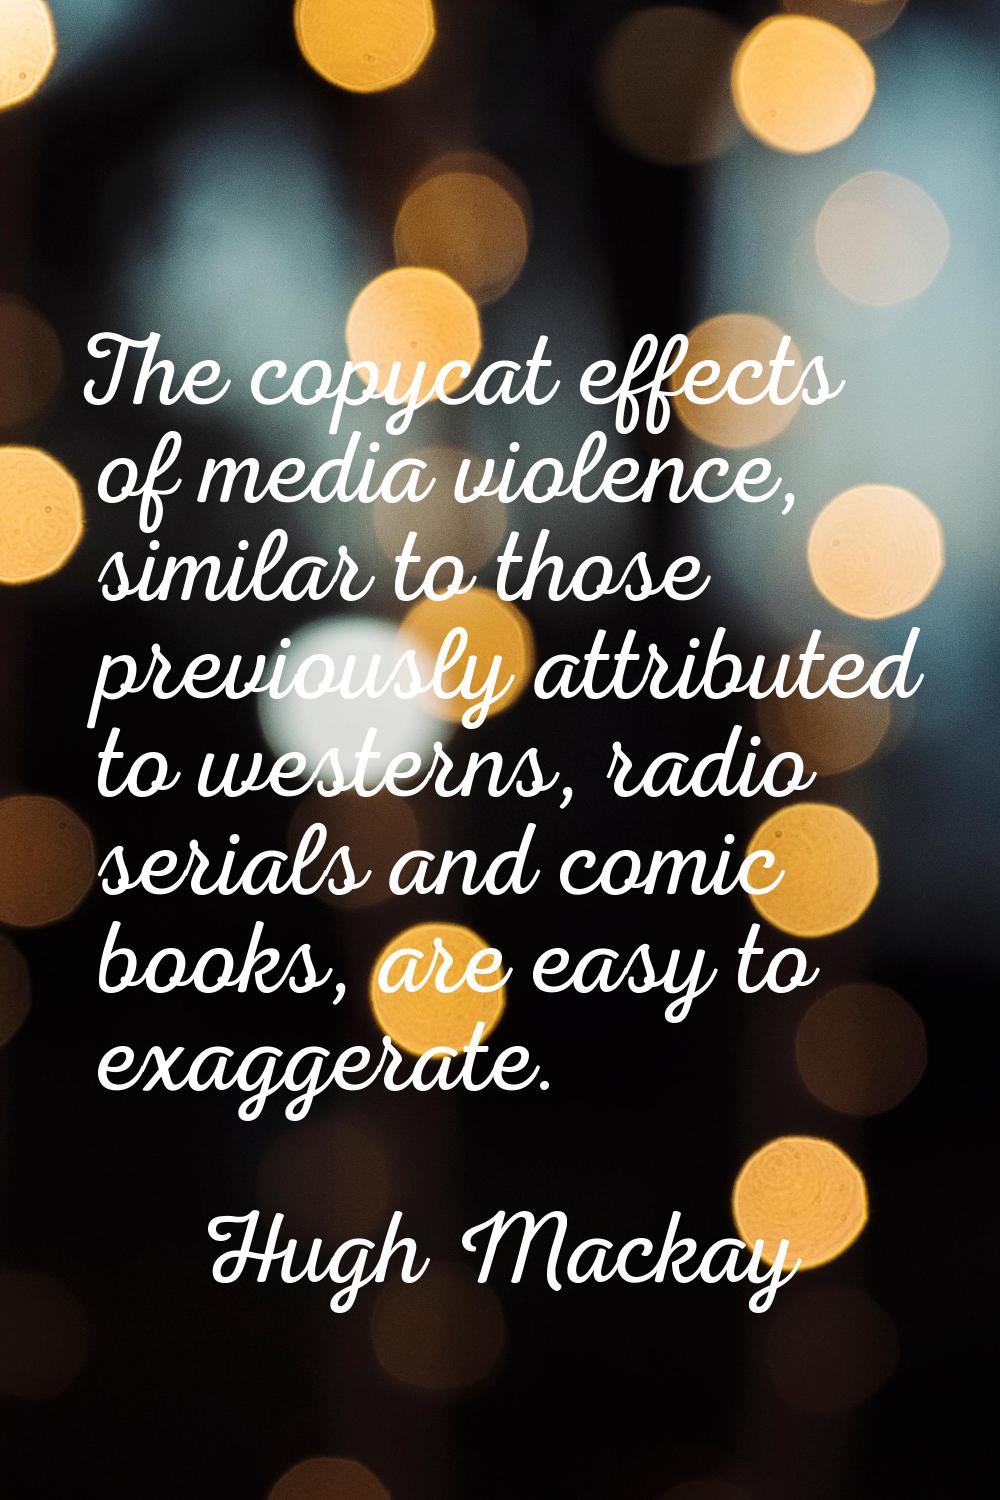 The copycat effects of media violence, similar to those previously attributed to westerns, radio se